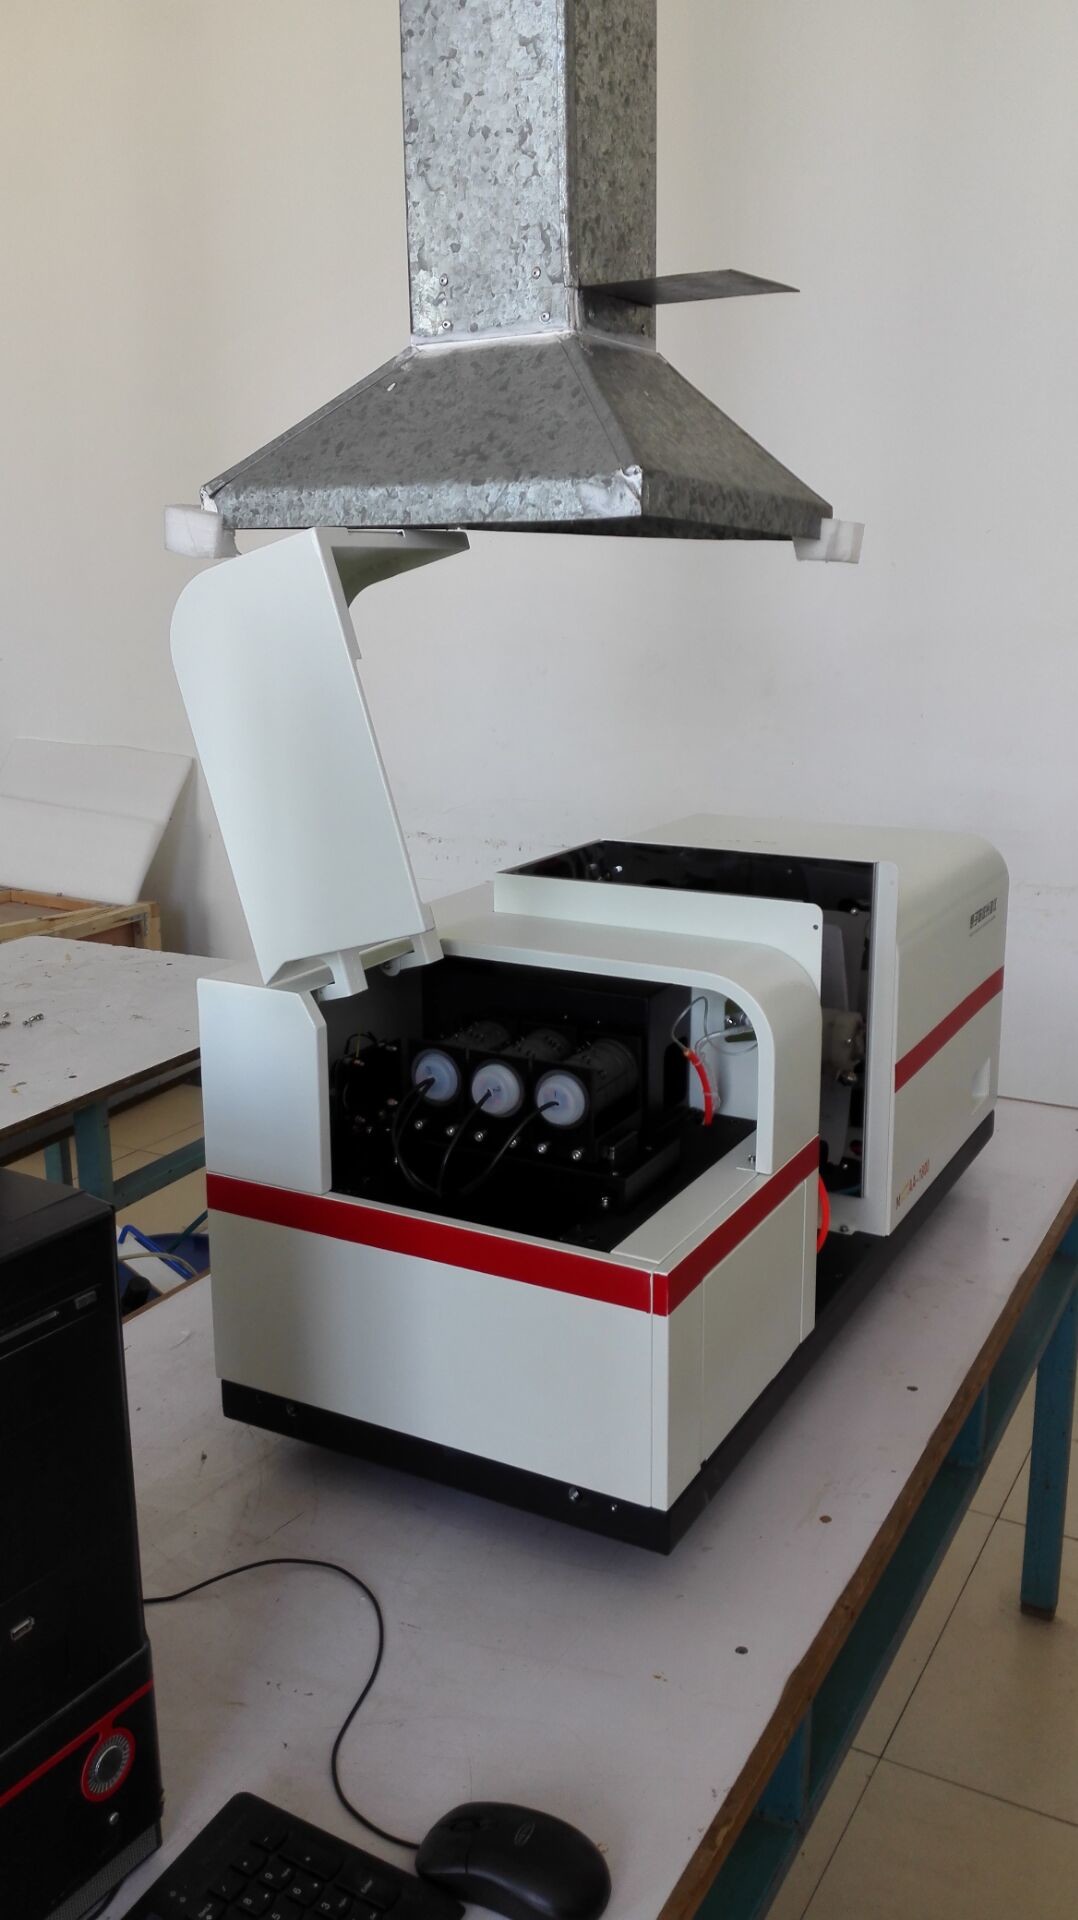 Wholesale 0.1nm Macylab Atomic Absorption Spectrophotometer 6 Lamps Flame 1800l/Mm Grating Ruling from china suppliers